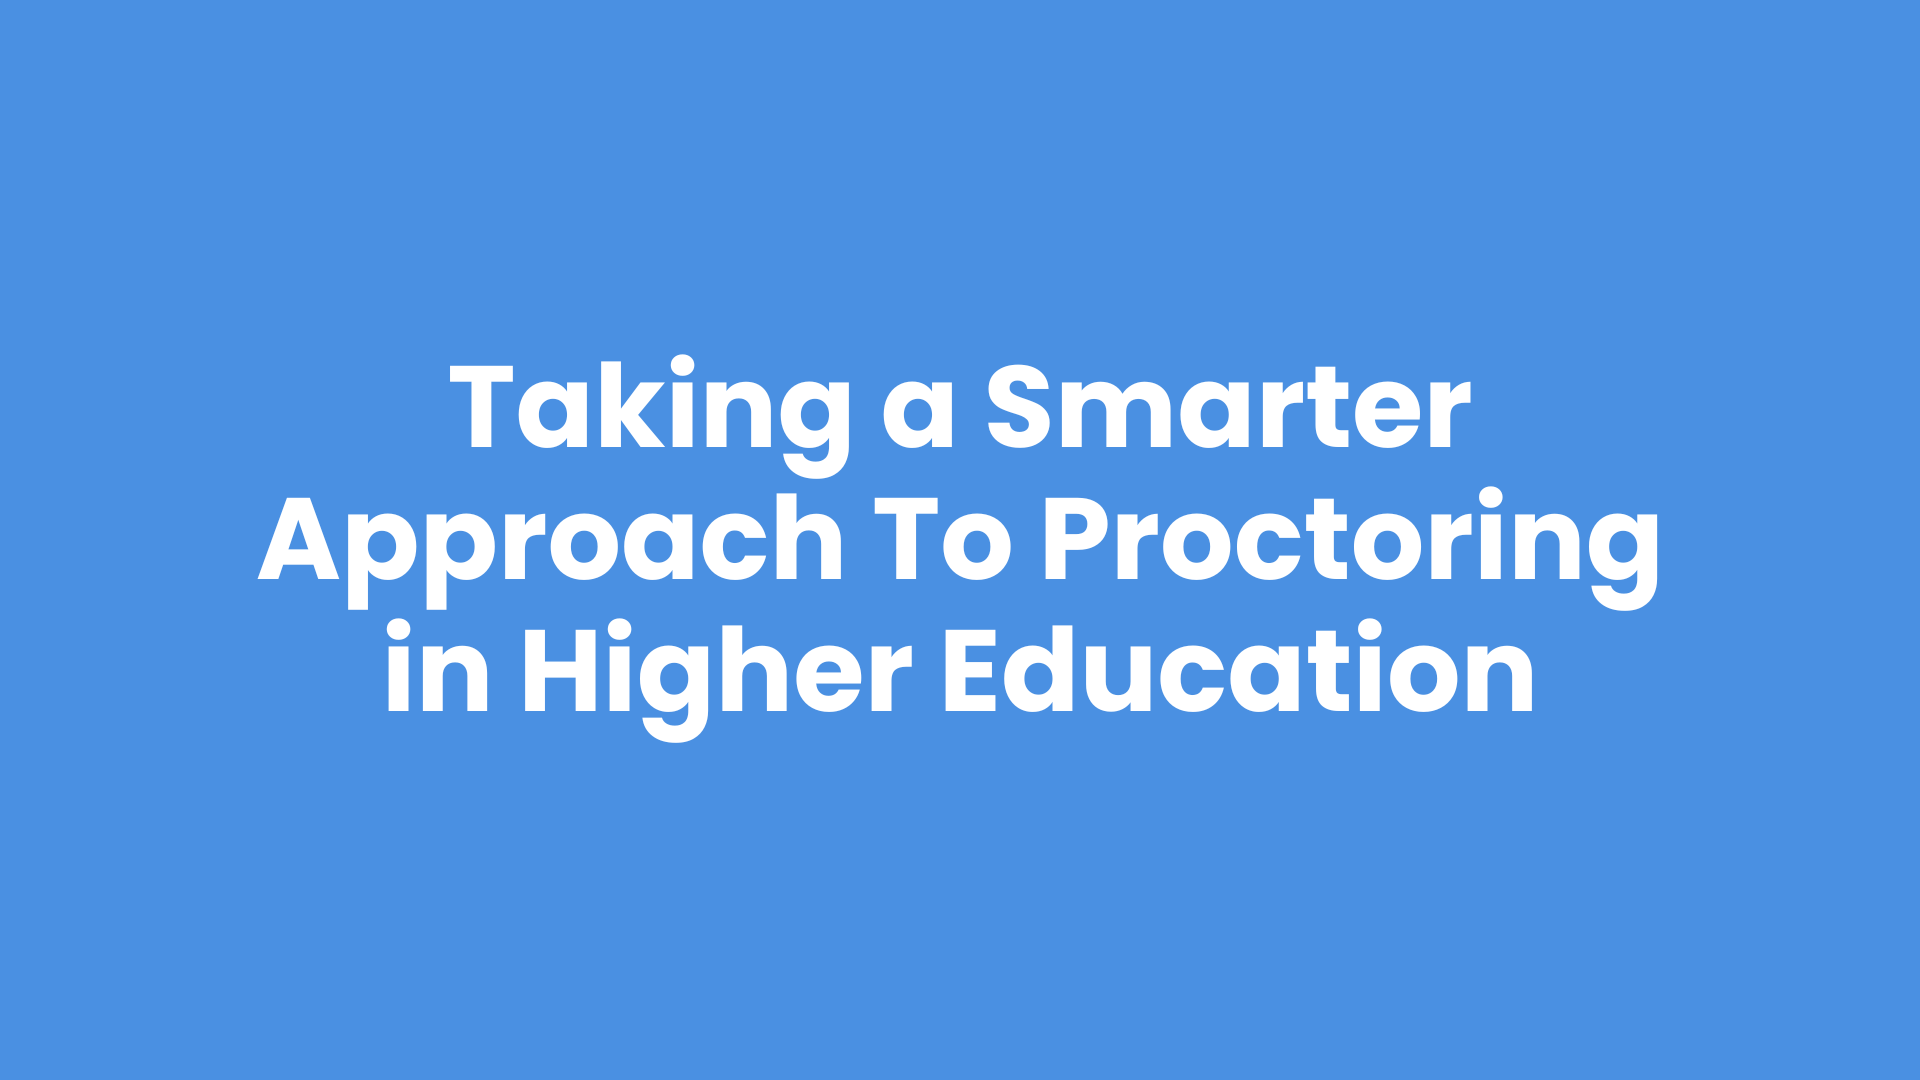 Taking a smarter proctoring approach in higher education